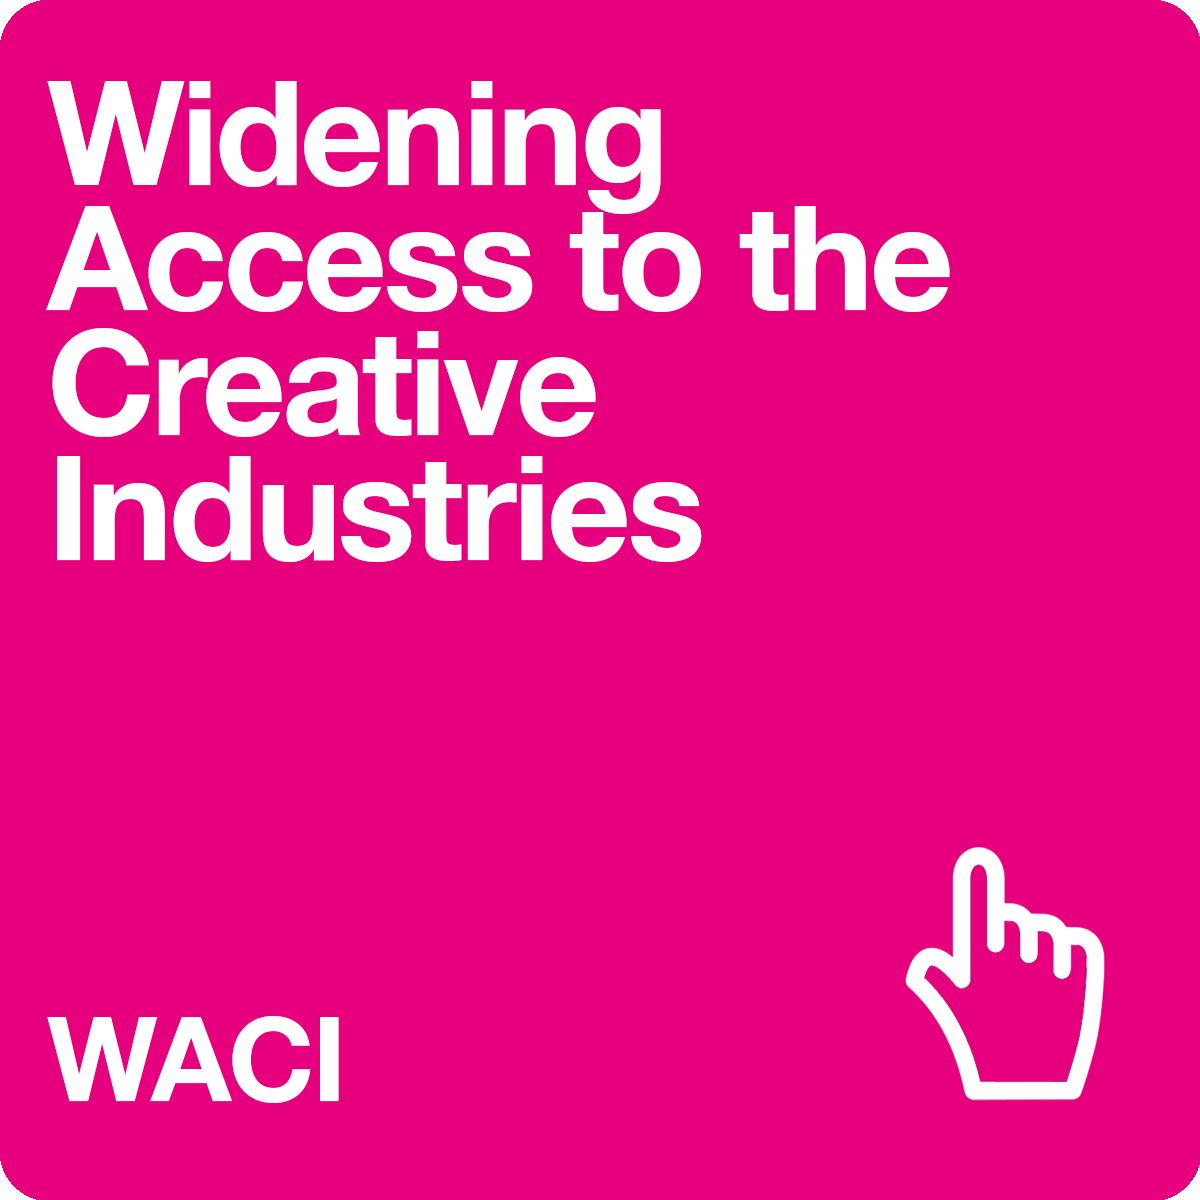 Text: Widening Access to the Creative Industries: WACI